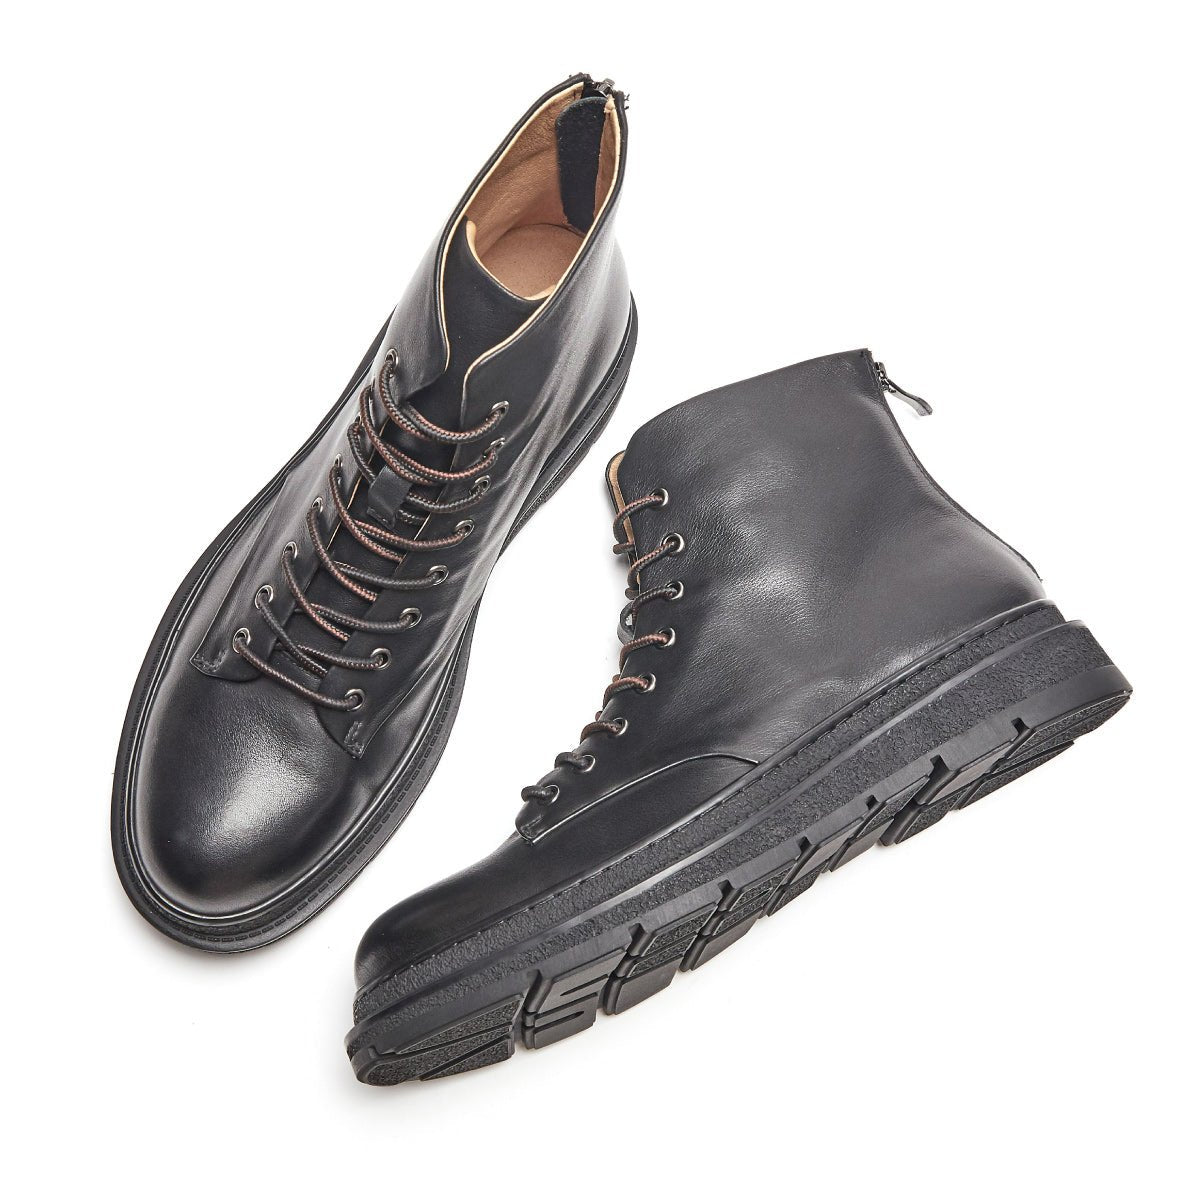 Slick Lace Up Black Leather Worker Boots - 0cm